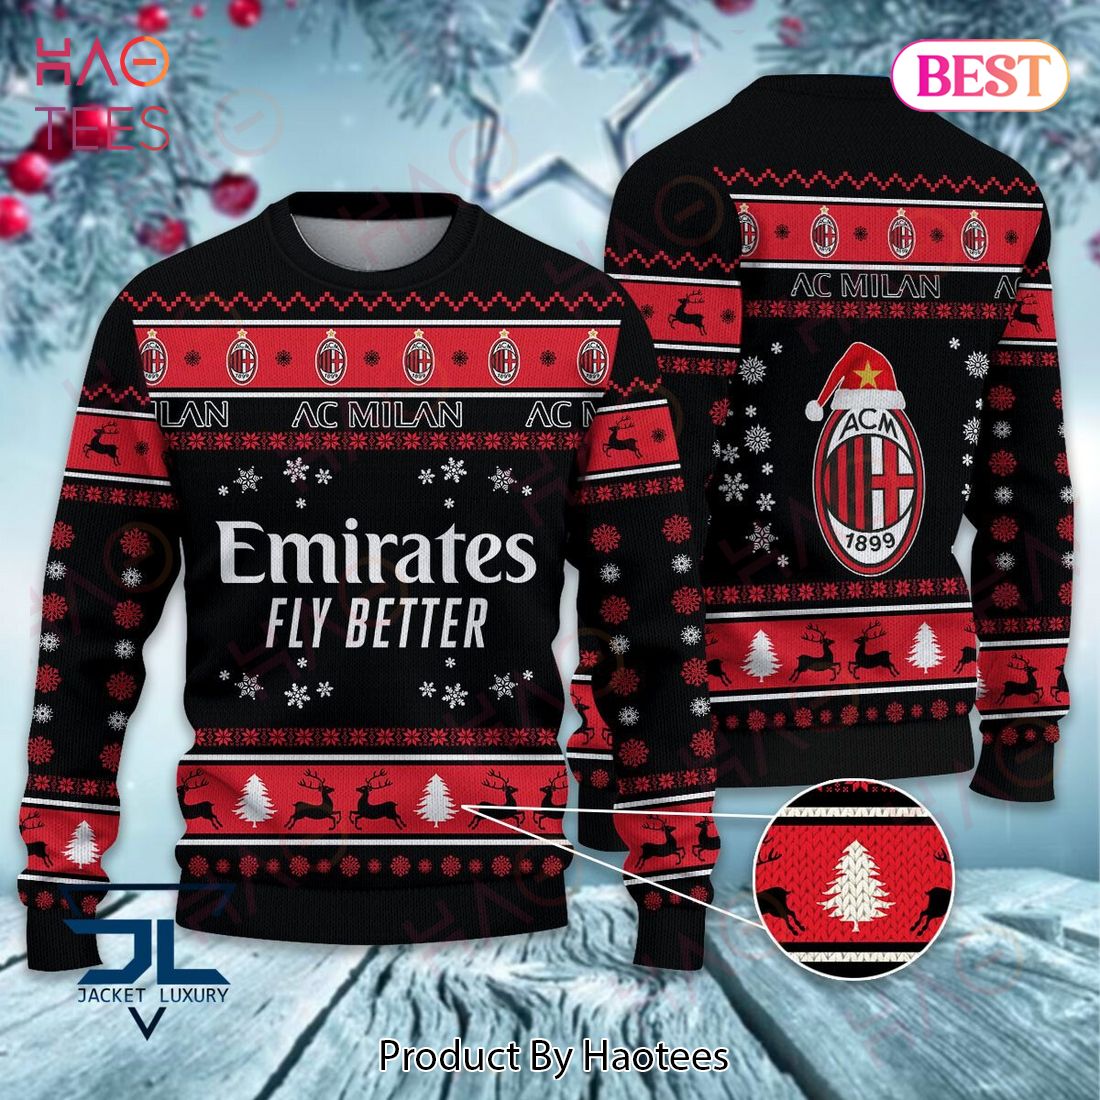 AC Milan Emirates Fly Better Christmas Luxury Brand Sweater Limited Edition